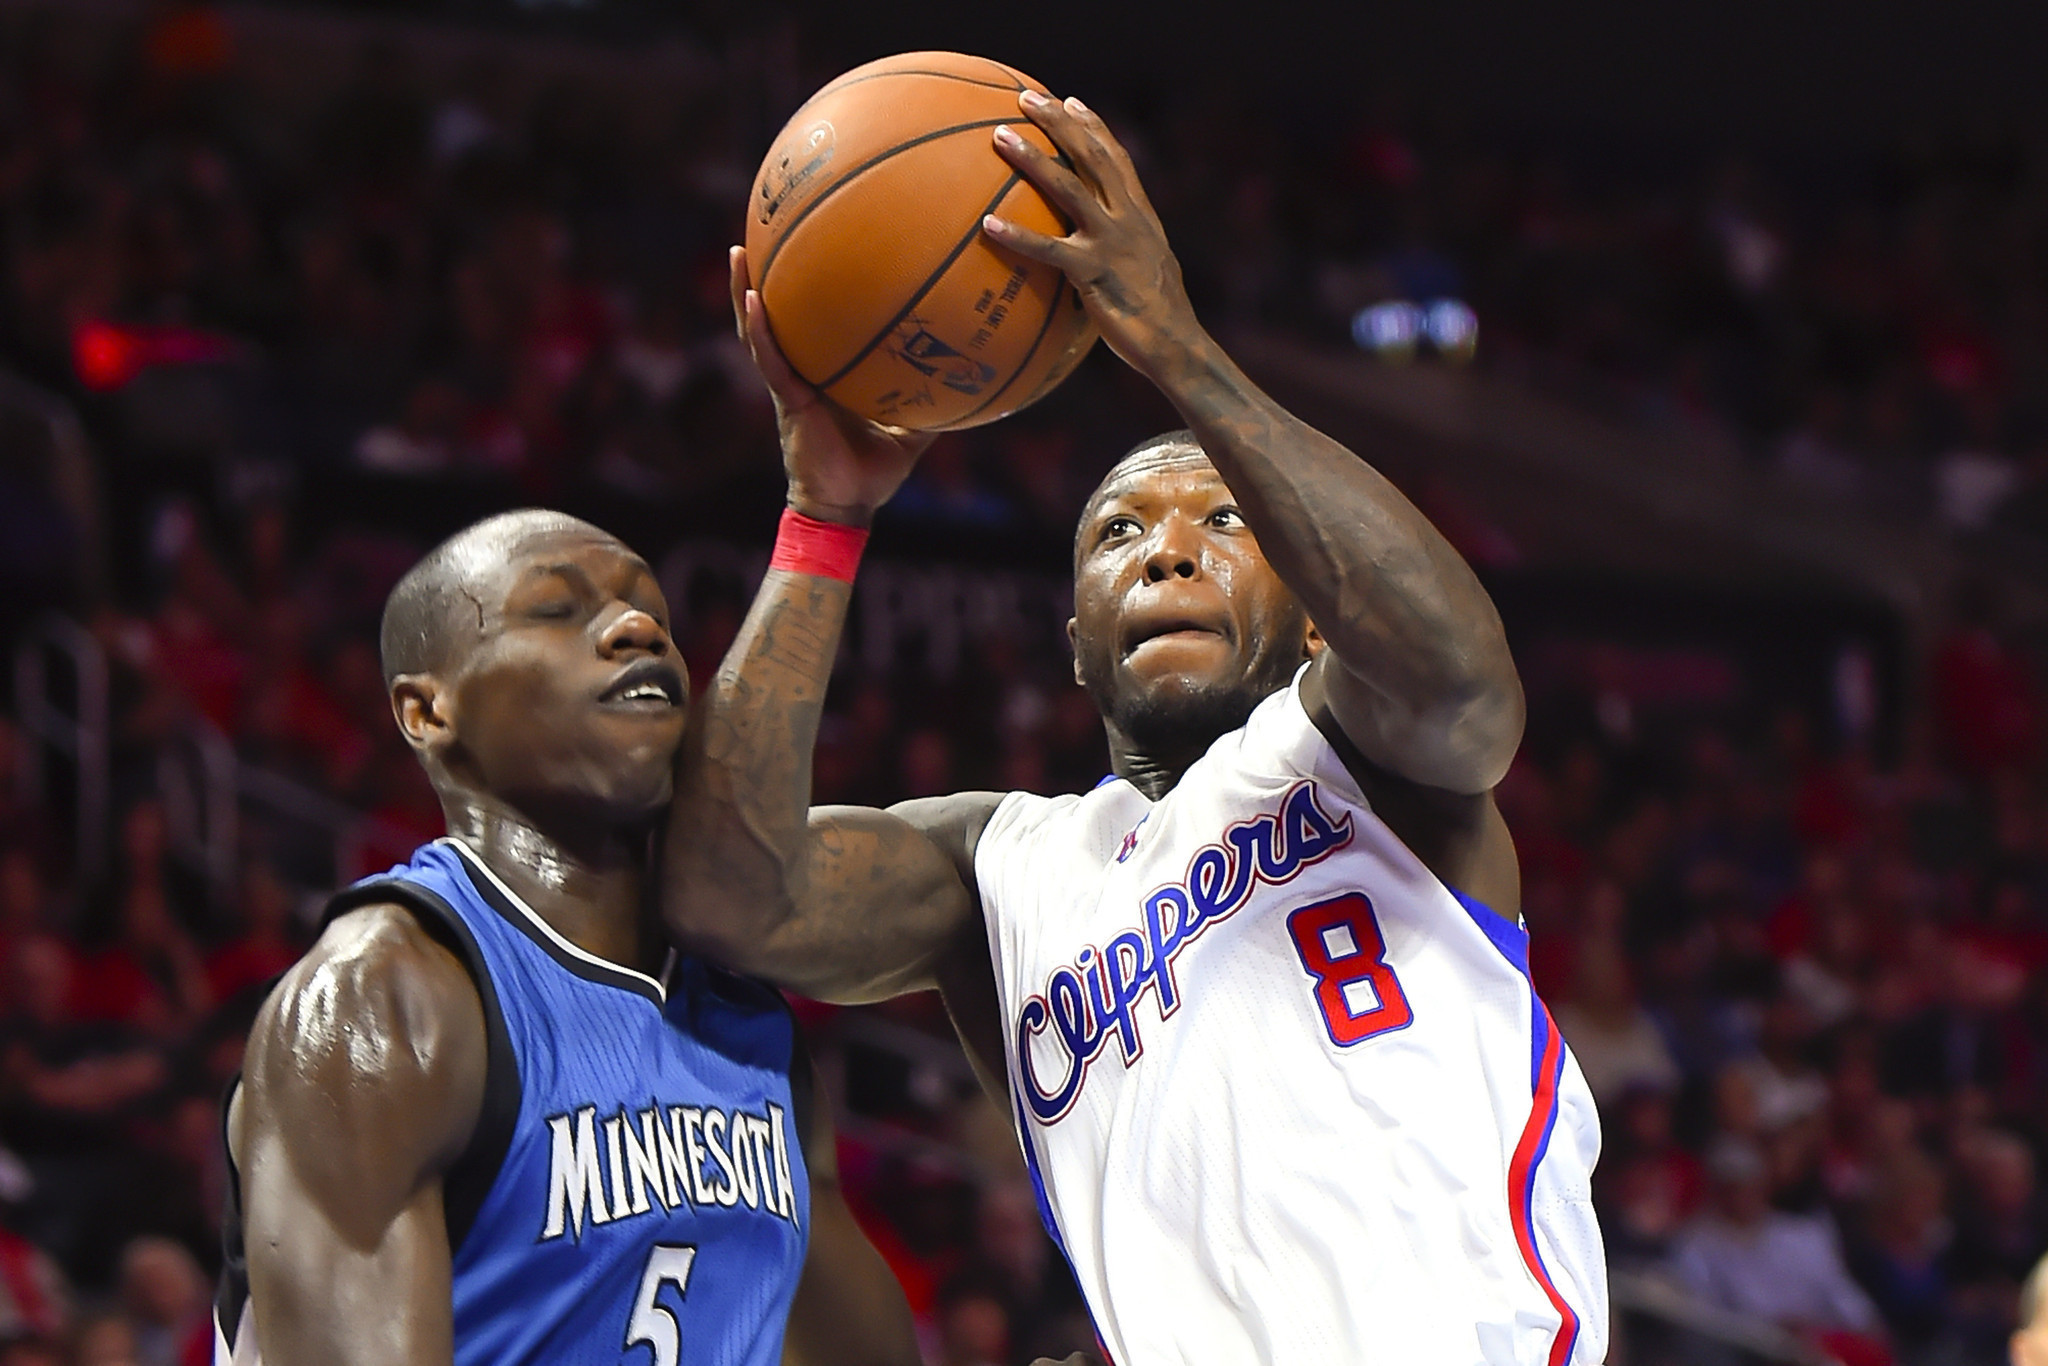 NBA free agent Nate Robinson intends to try out for NFL teams - LA Times